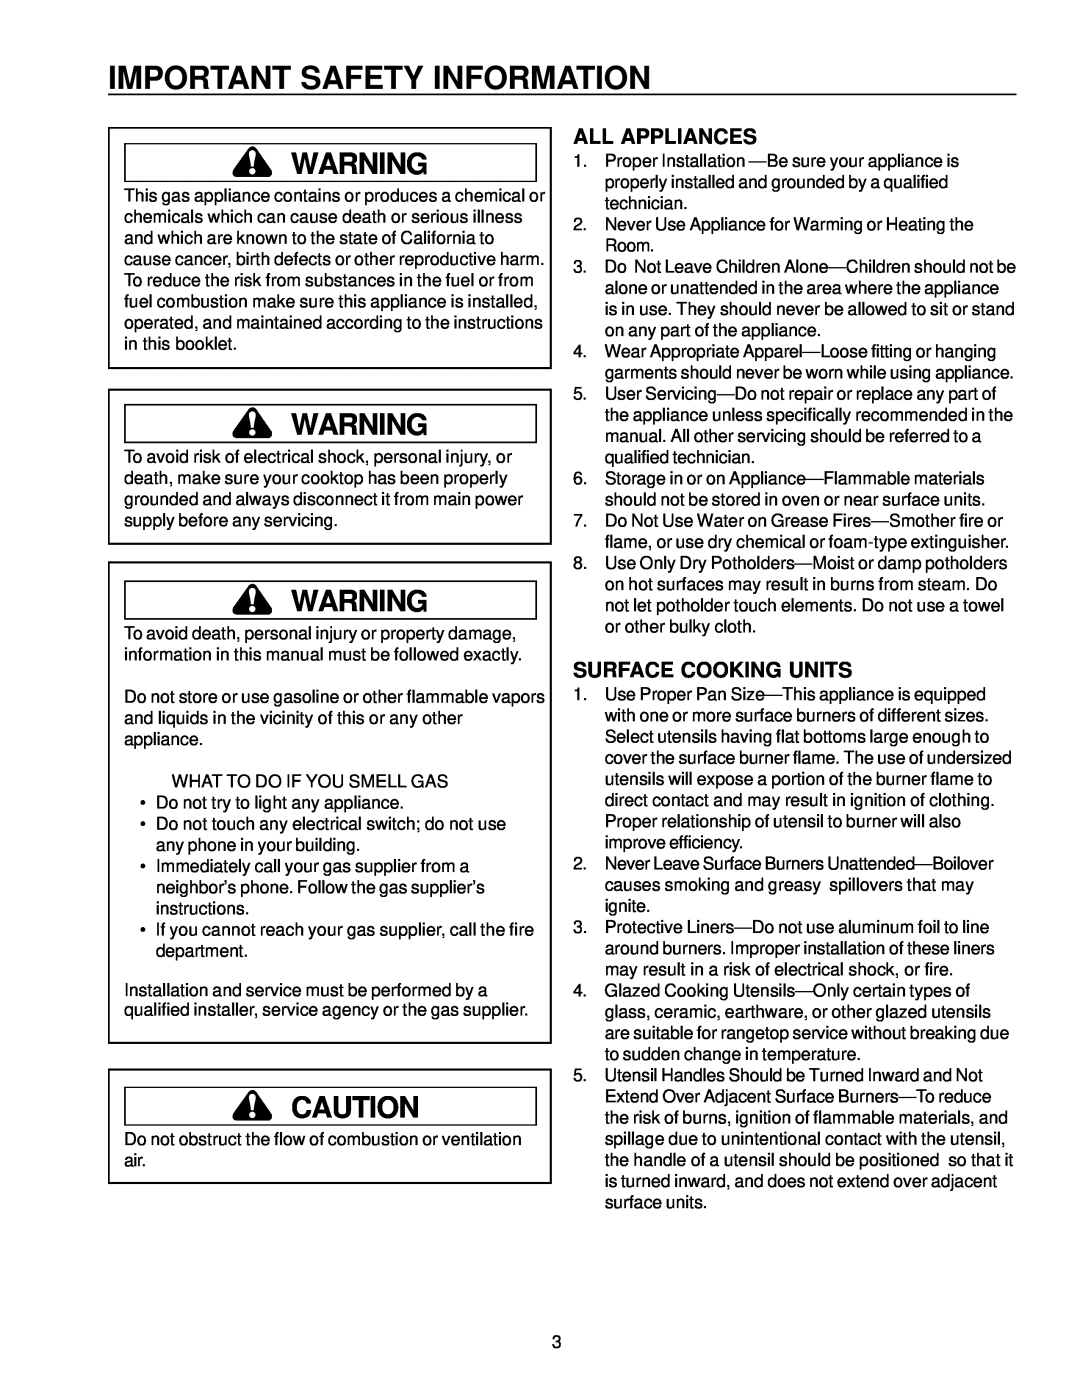 Amana AKS3020 owner manual Important Safety Information, All Appliances, Surface Cooking Units 